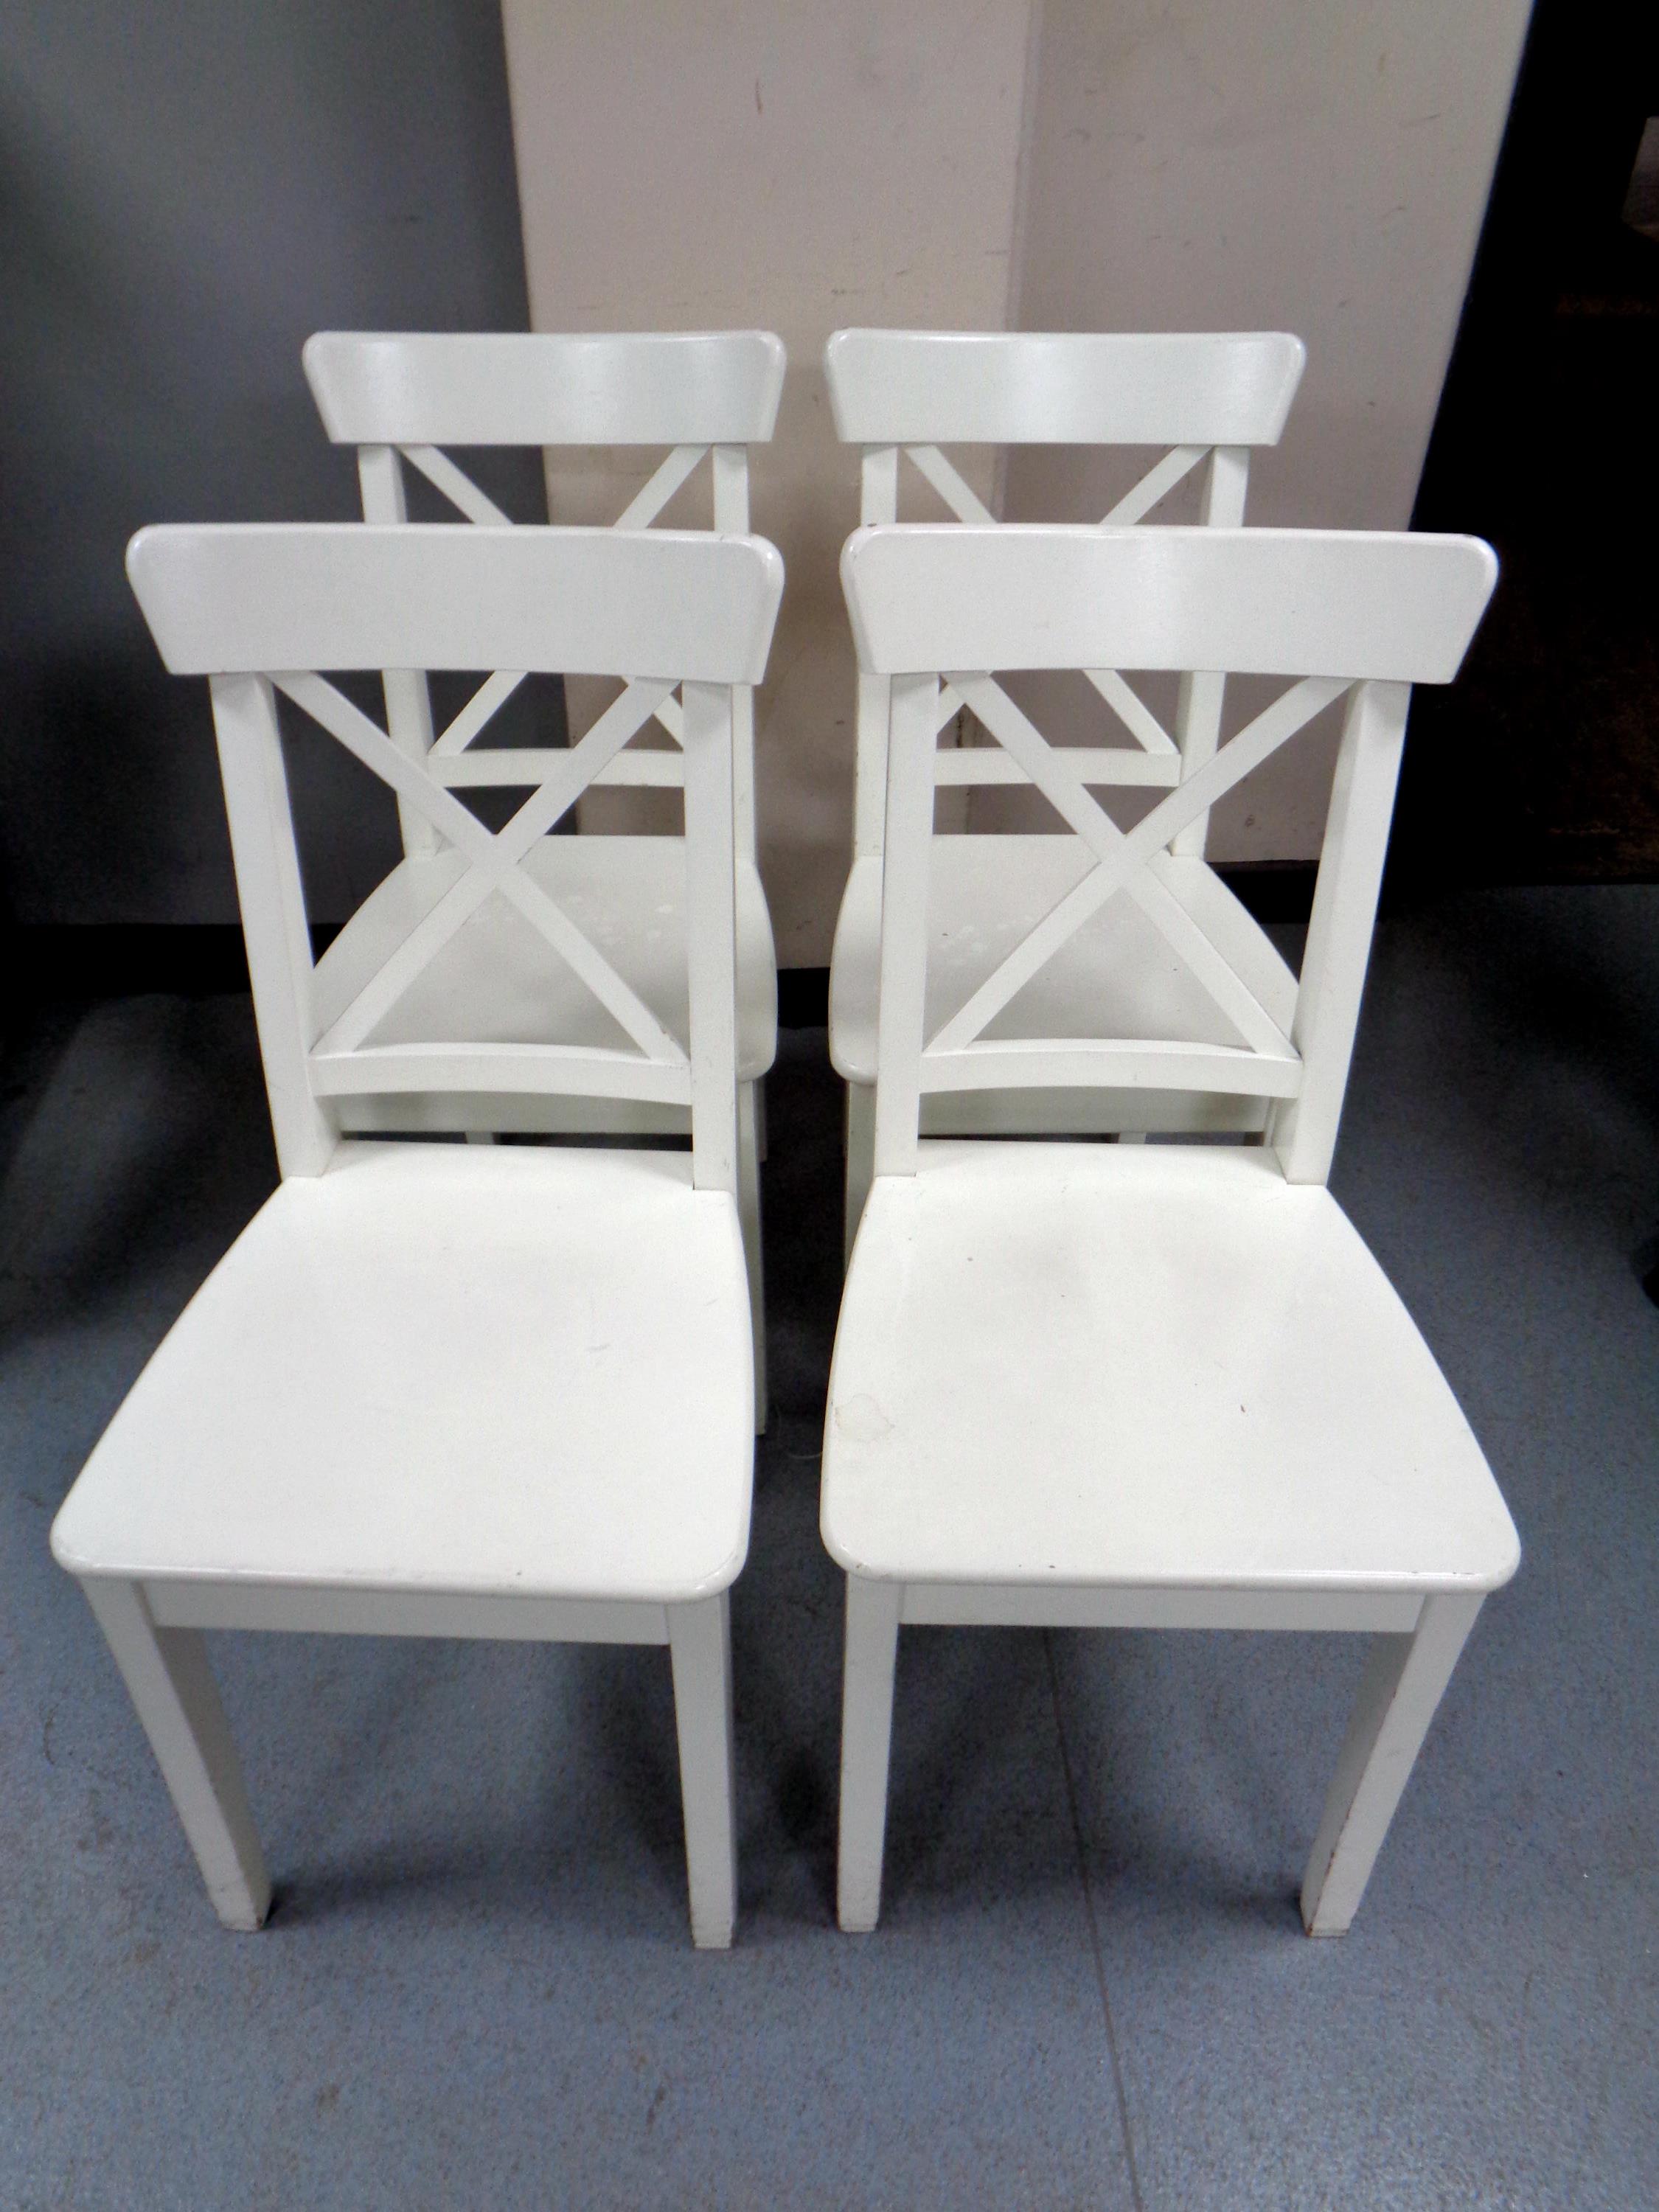 A set of 23 Ikea Ingolf dining chairs